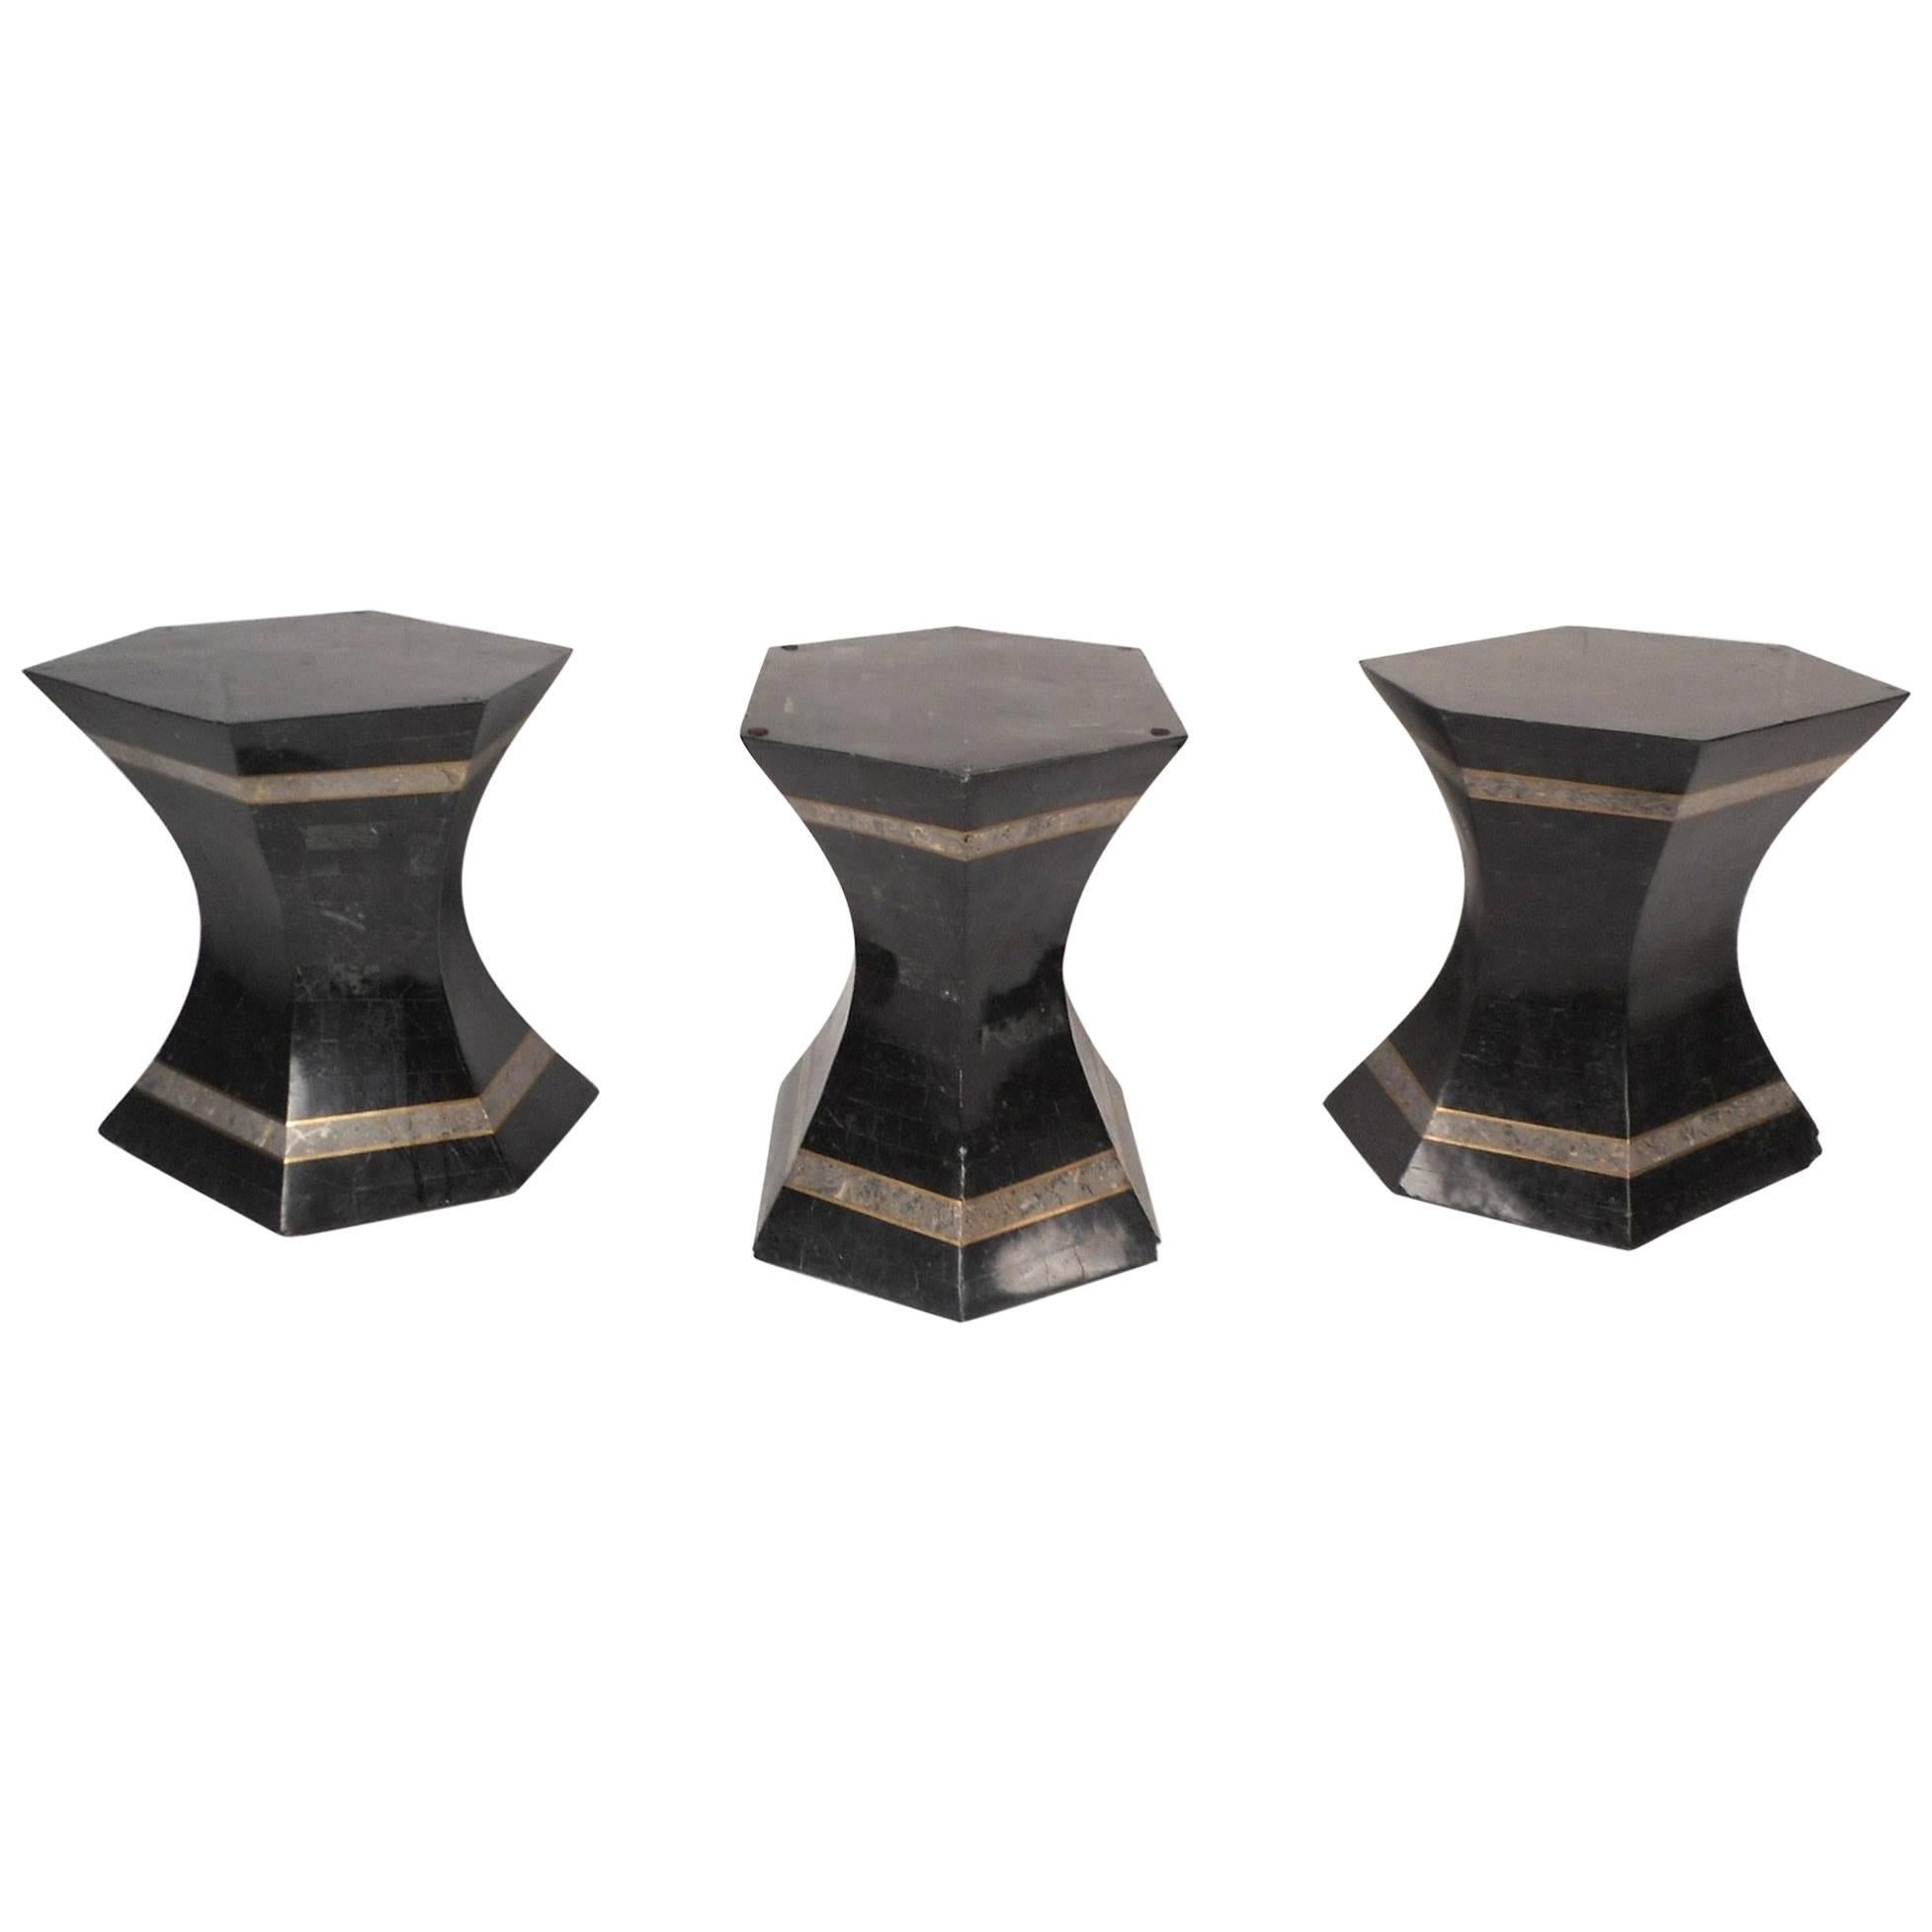 Three Tesselated Stone Tables by Robert Marcius for Casa Bique For Sale